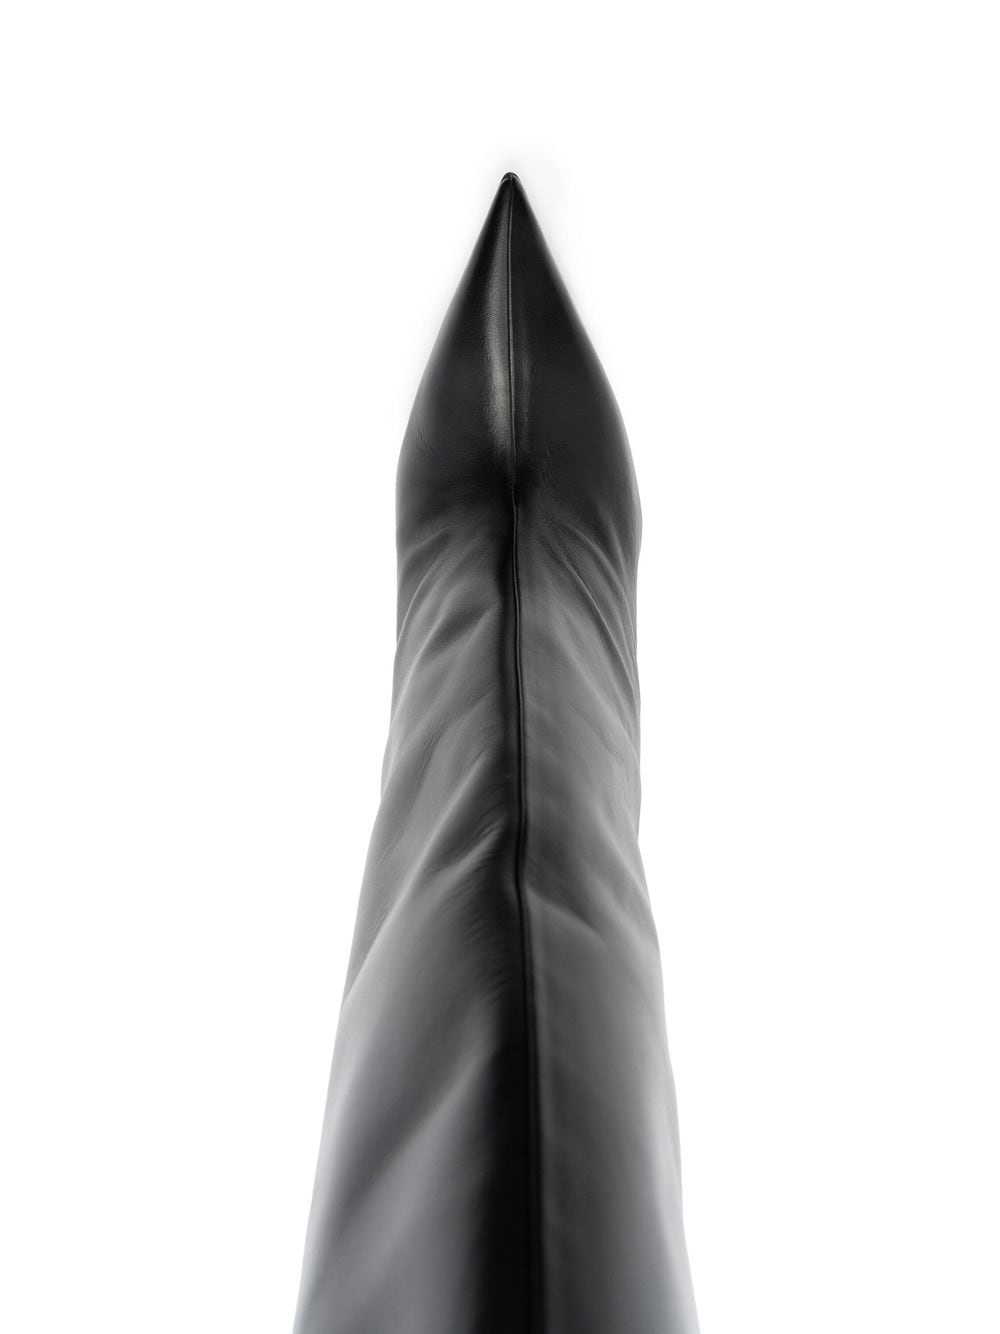 CHEOPE CALF LEATHER TUBE BOOT 105mm - 4